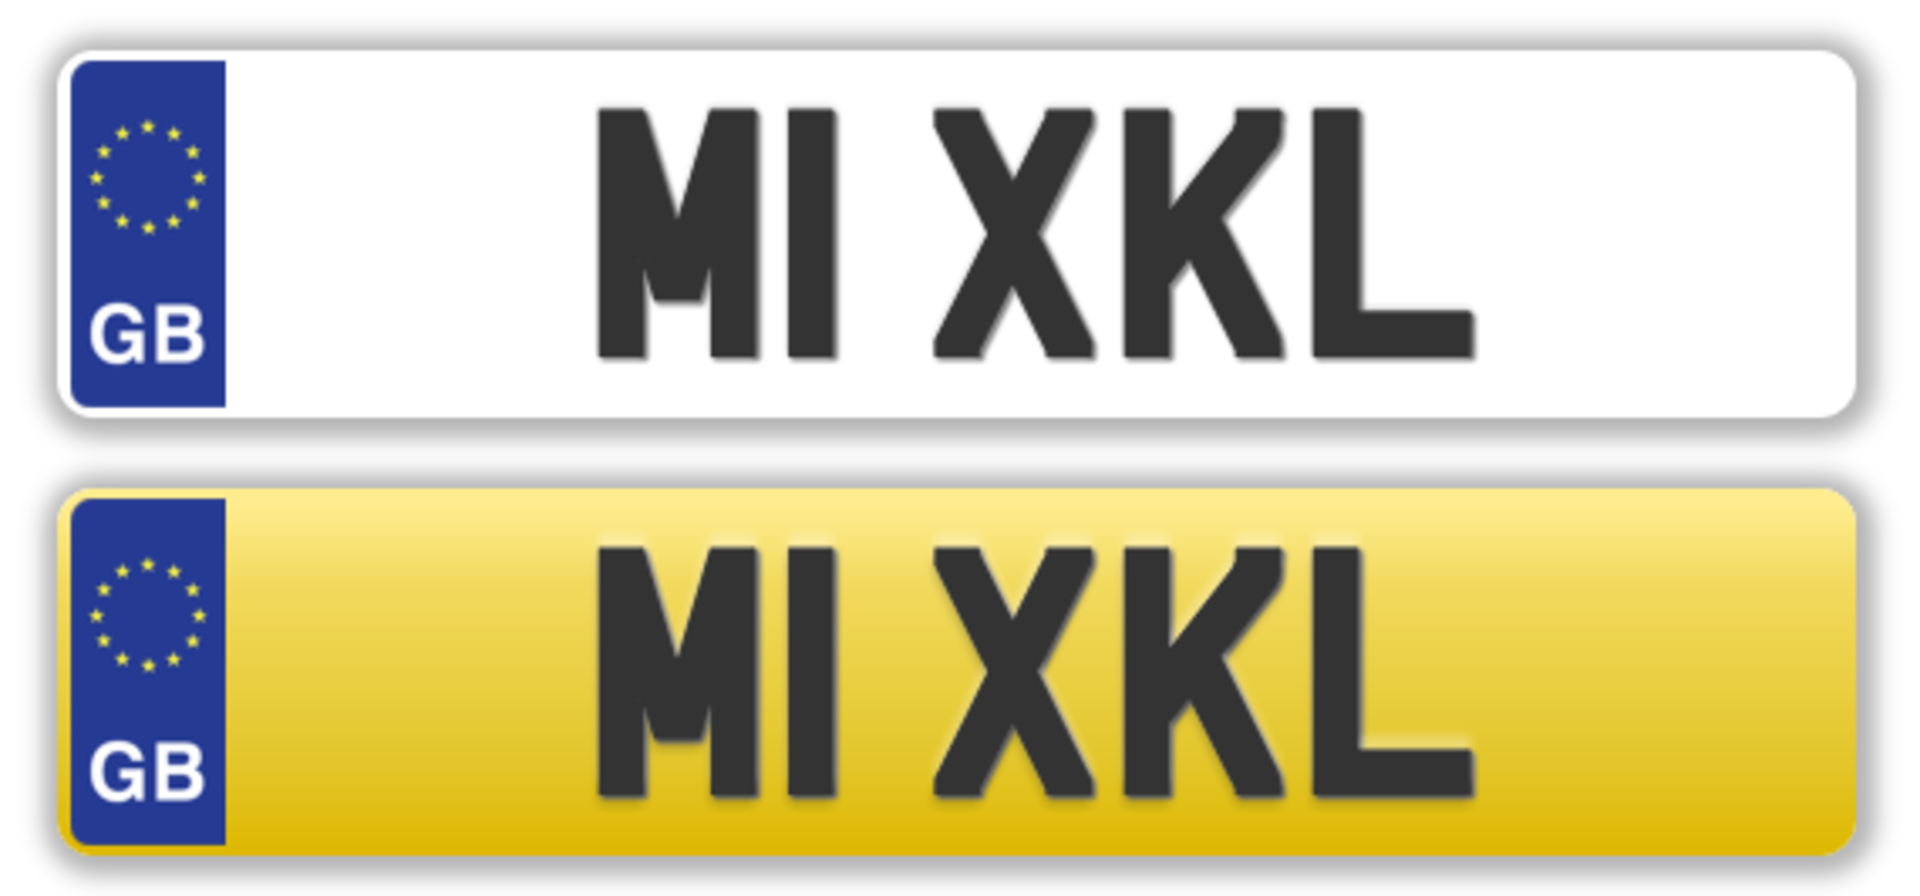 Cherished Plate - M1 XKL - No transfer fees. All registrations on retention and ready to transfer.